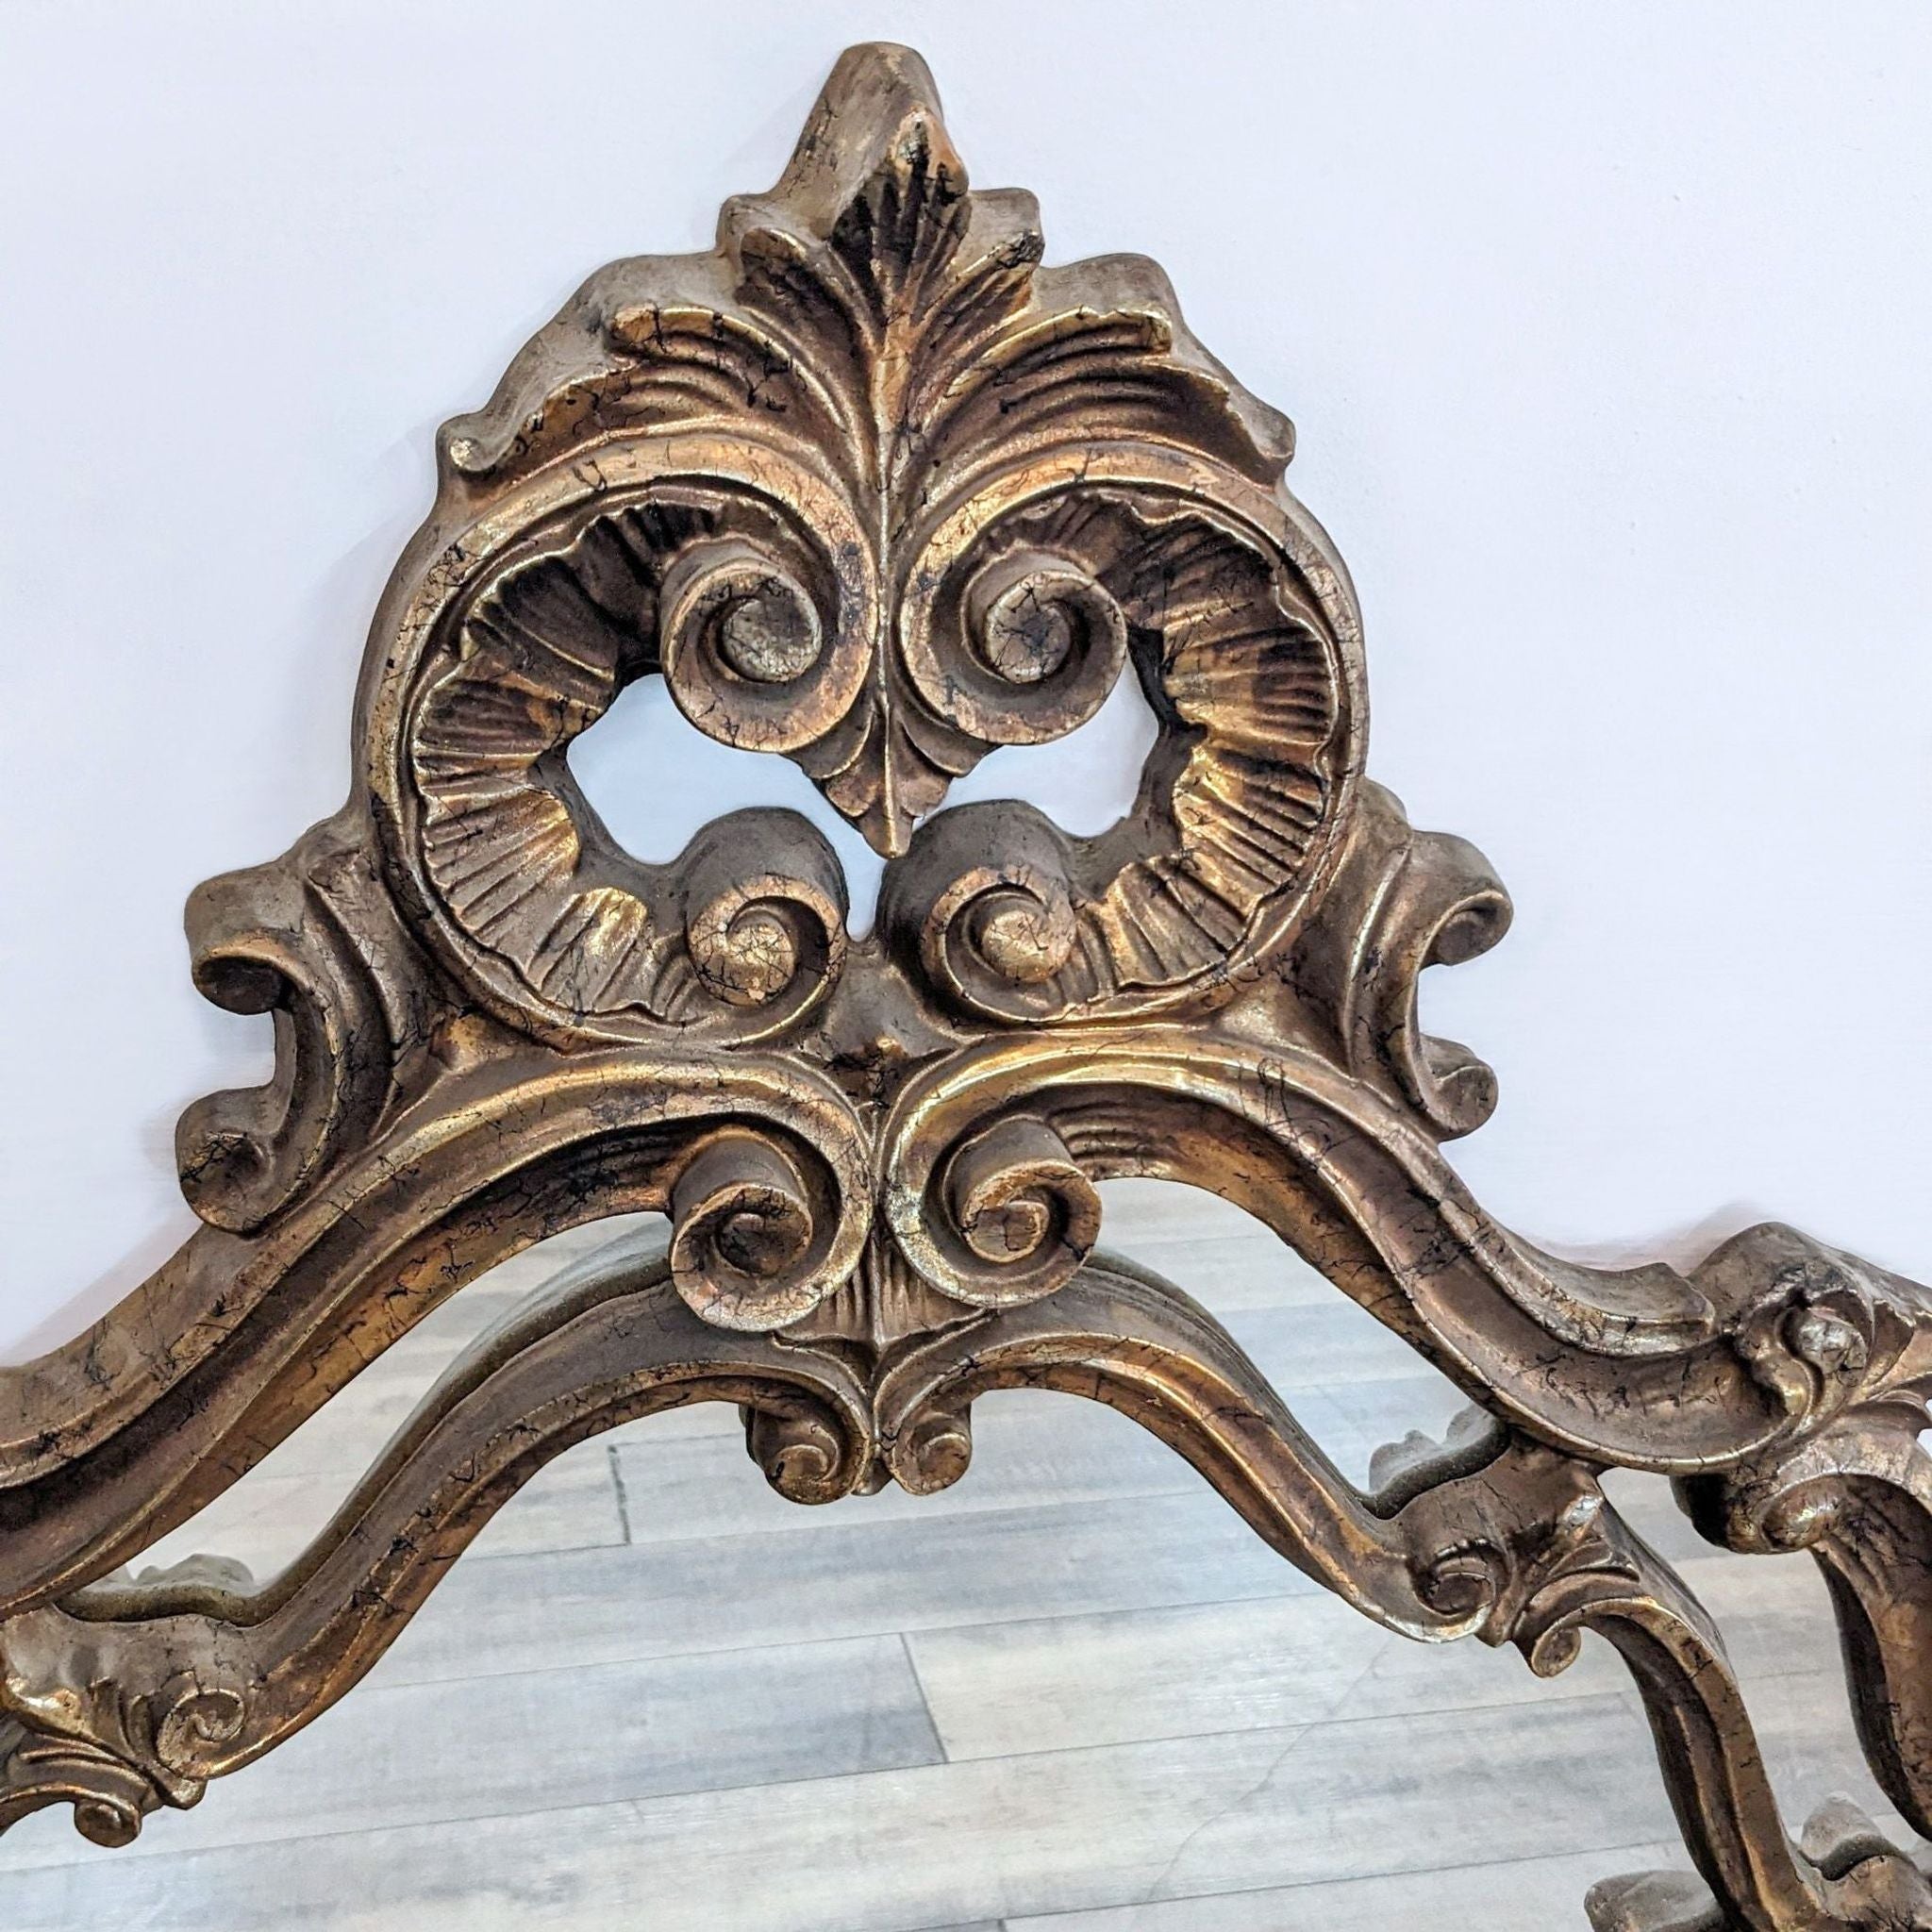 Close-up of Reperch mirror detailing, showcasing elaborate carved designs in the antique gold frame.